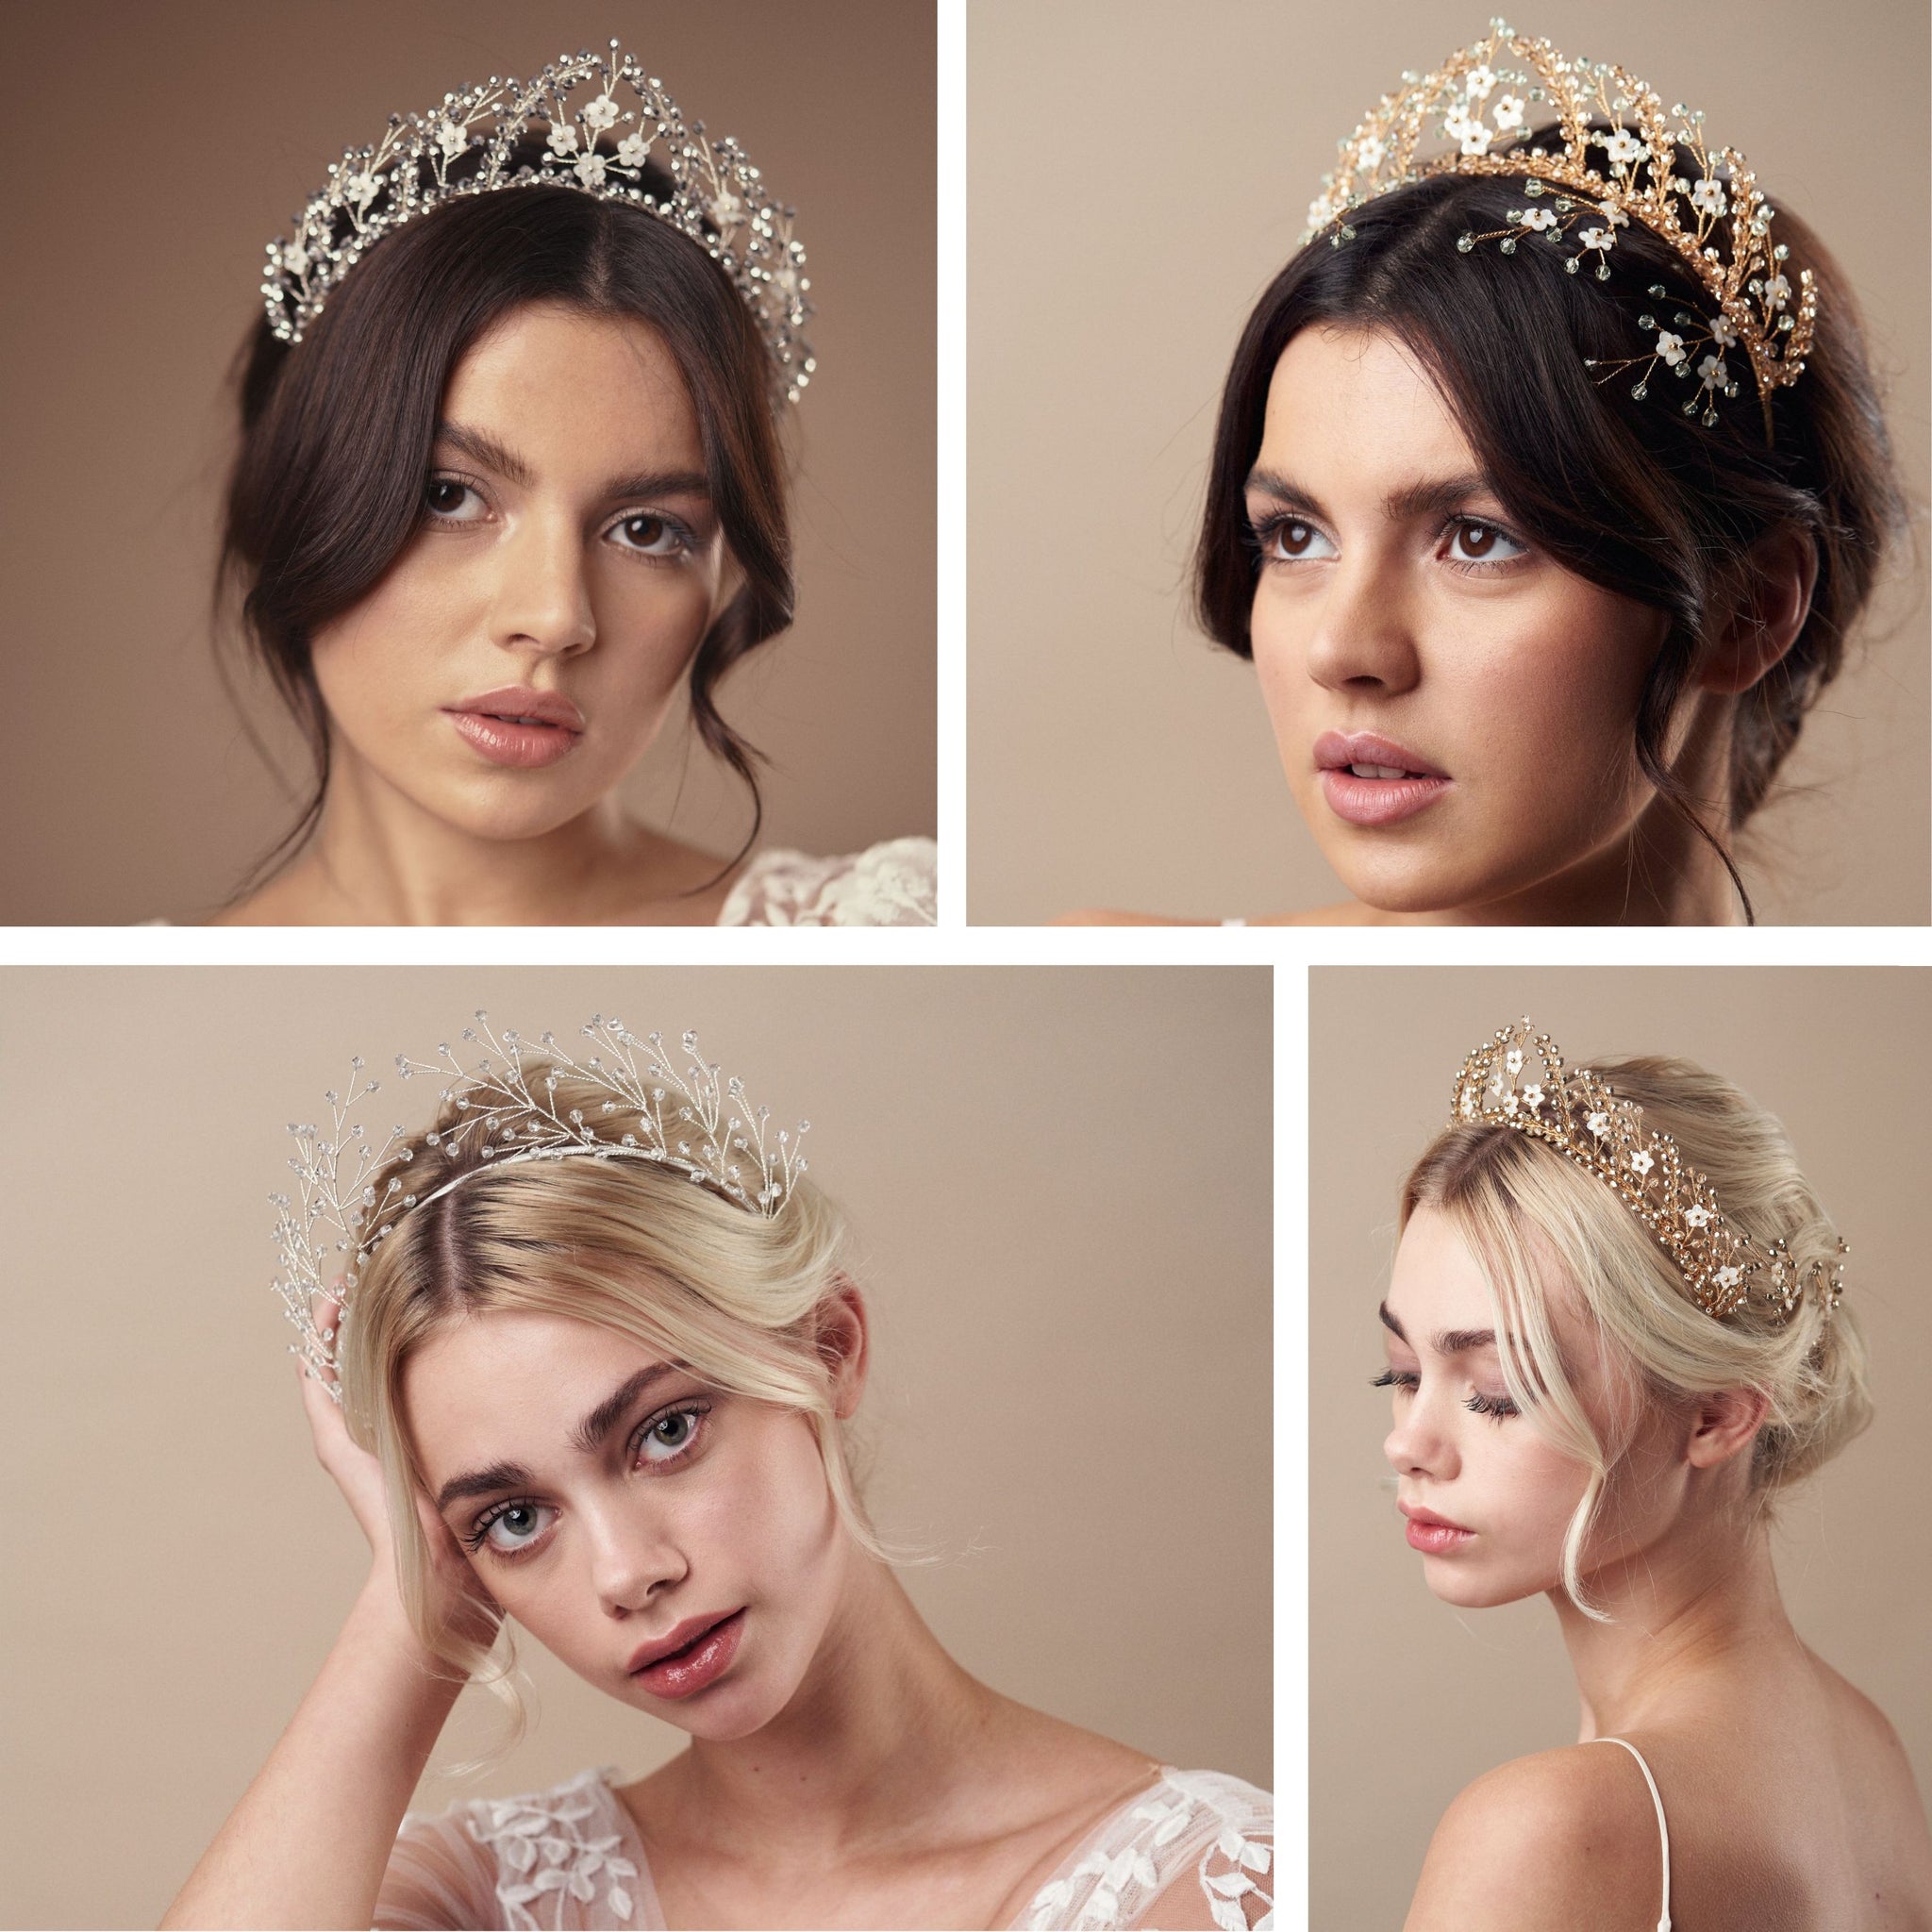 how to choose a wedding crown - four models wearing different wedding crowns in gold and green, silver, gold and clear crystal designs